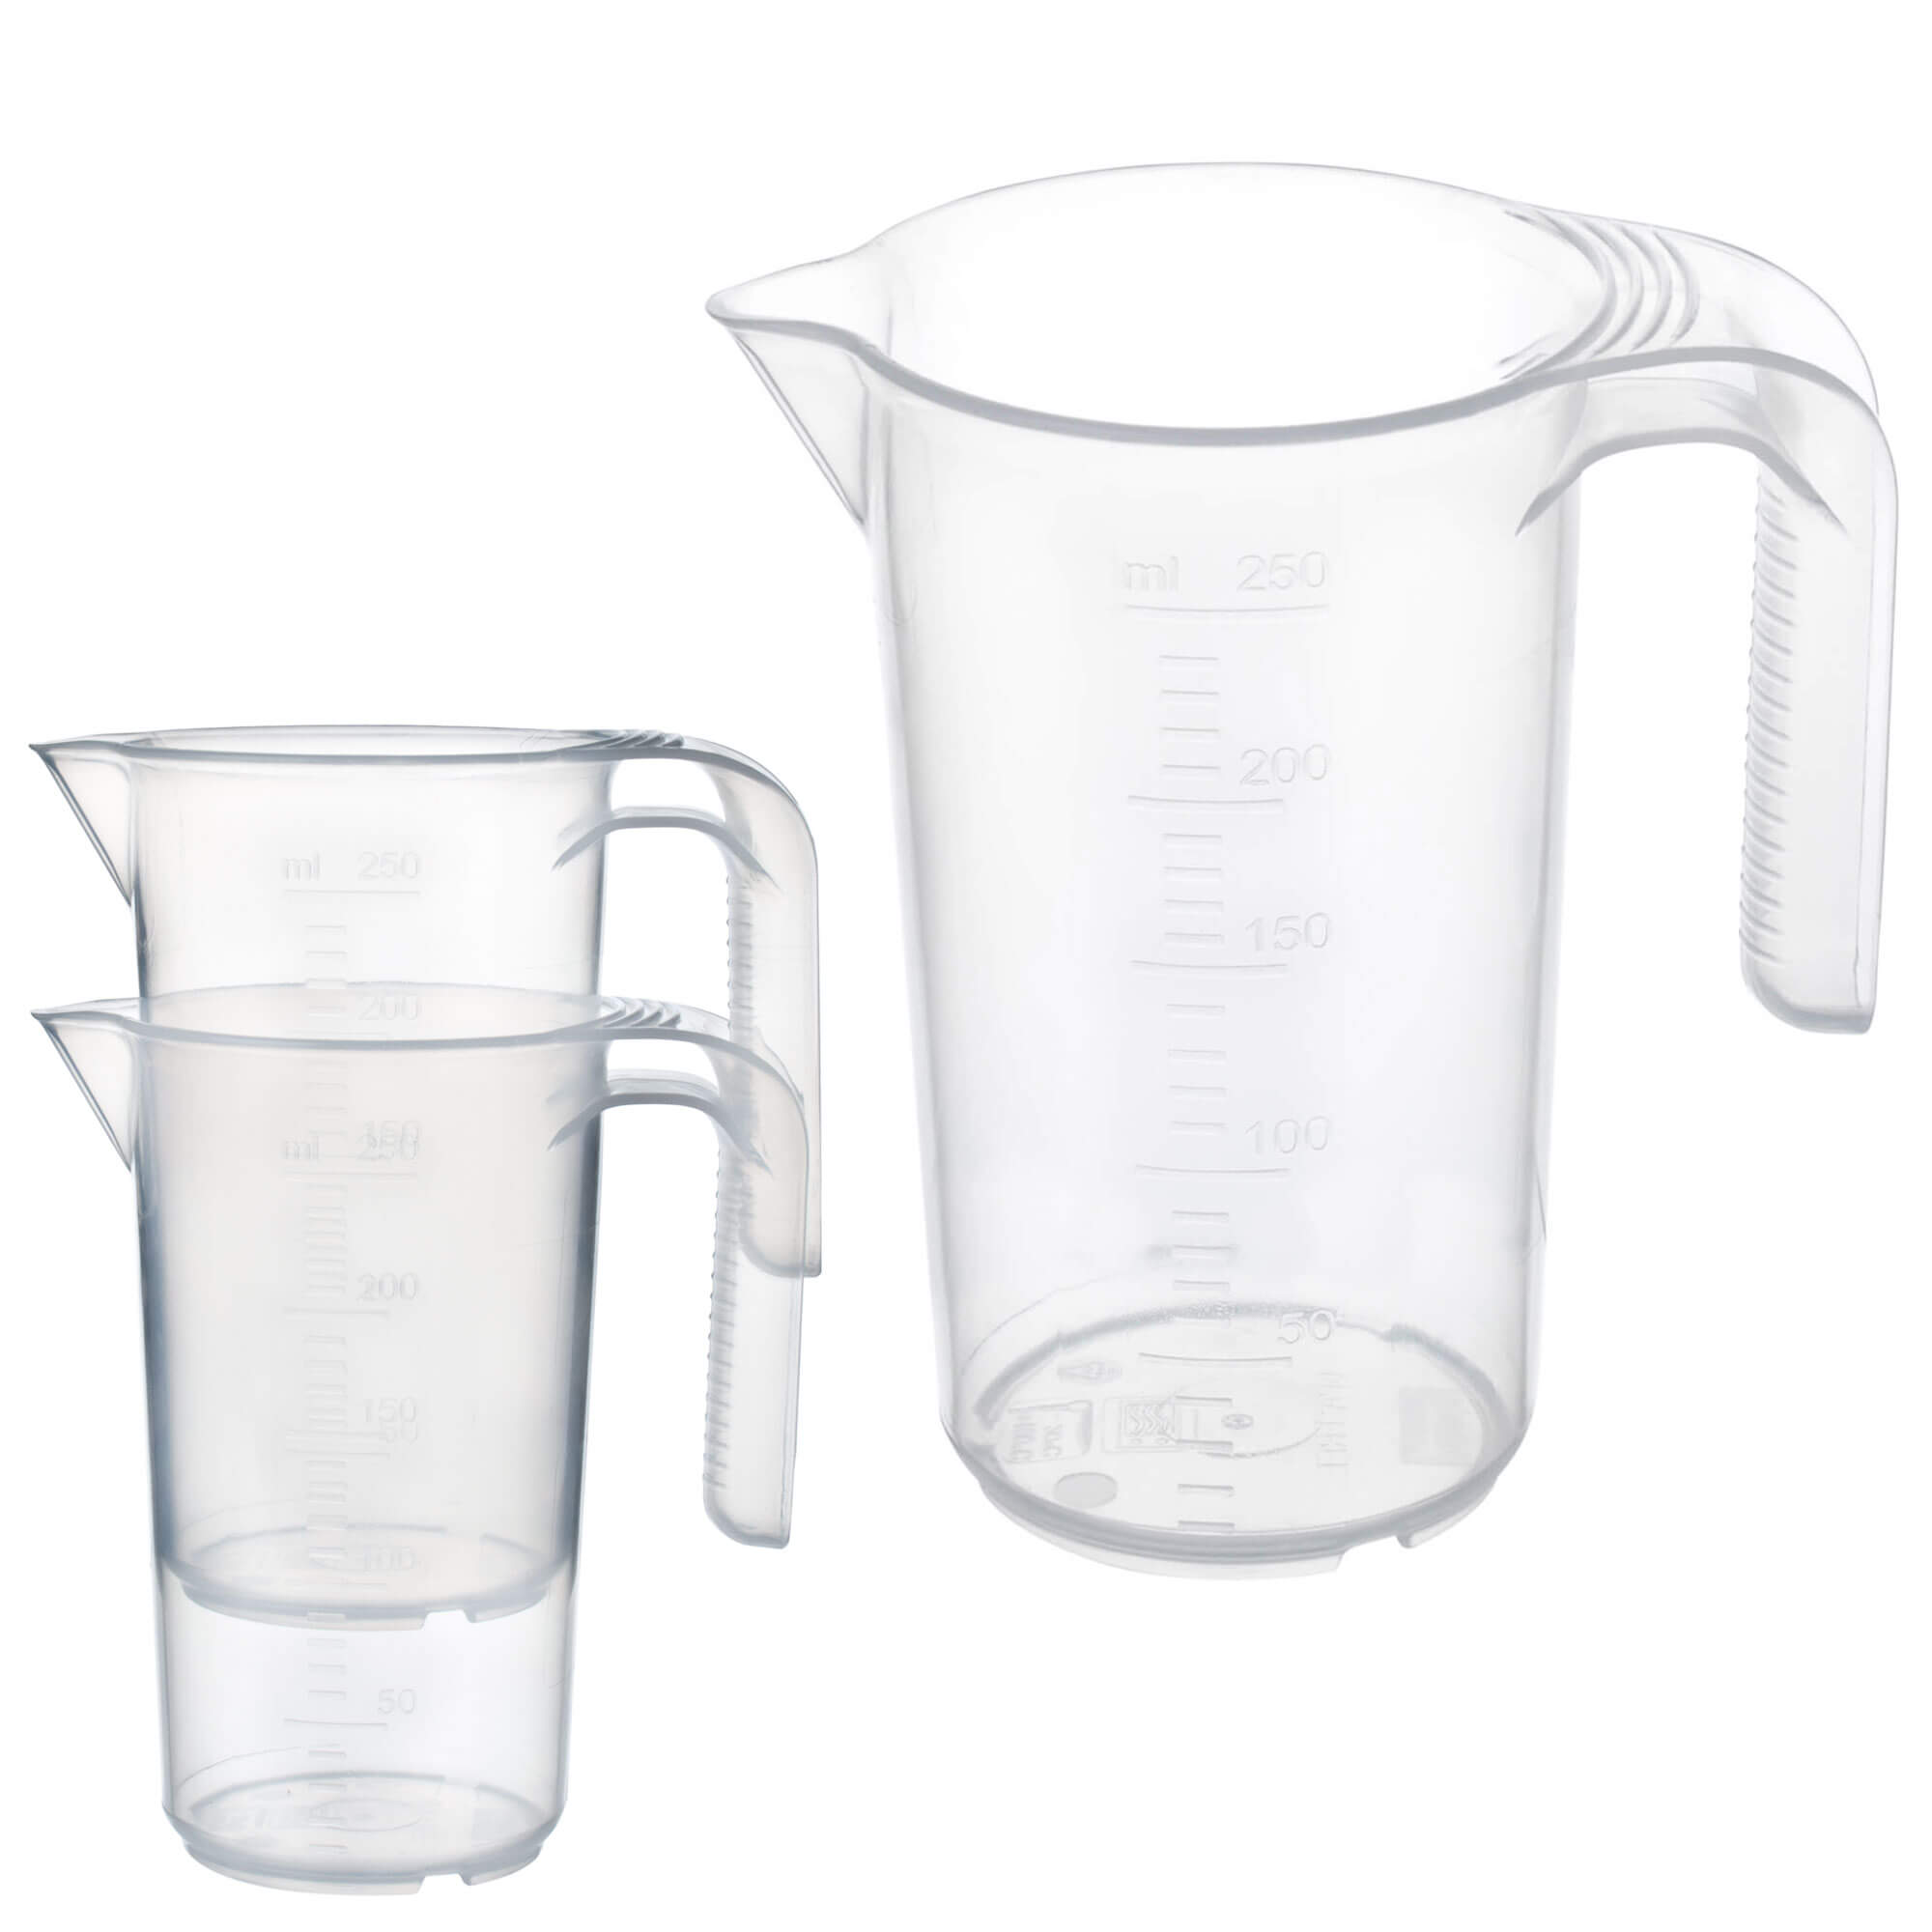 Measuring cup, stackable, PP - scale up to 250ml